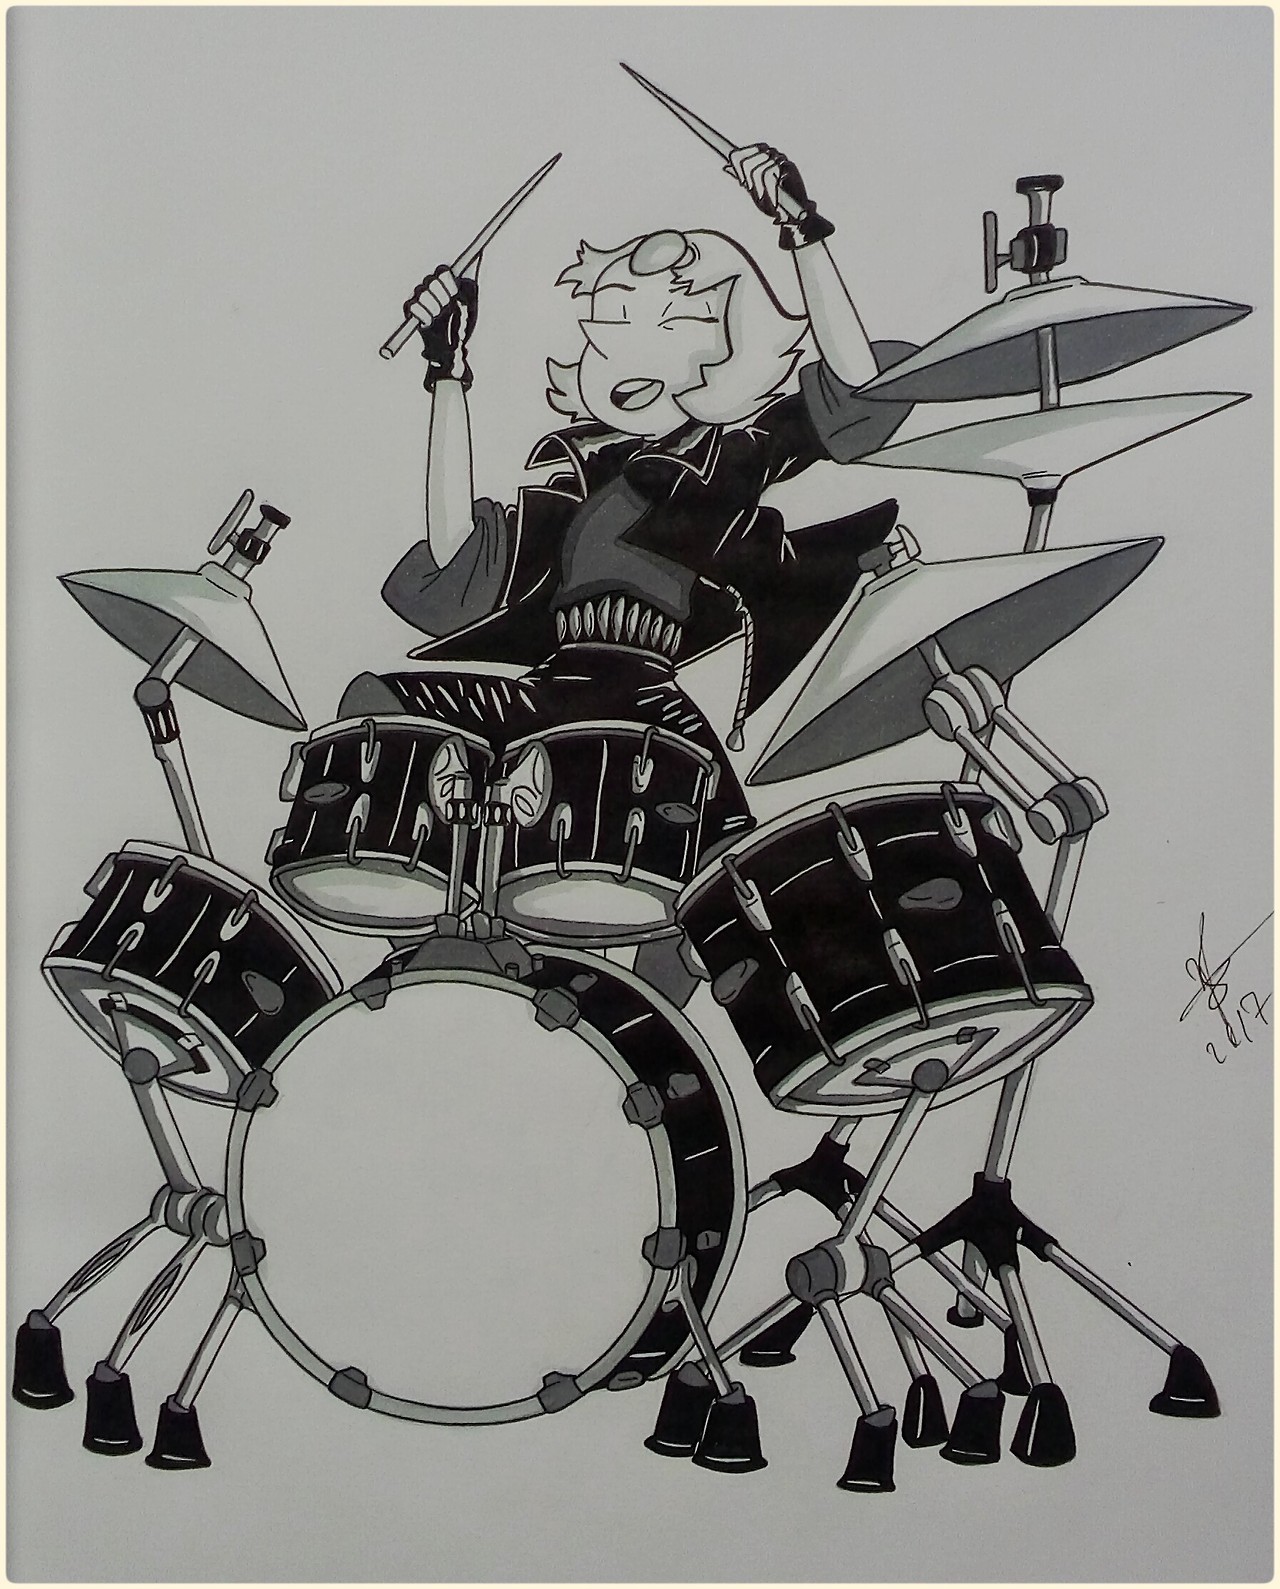 (reupload). So, i decided to redraw pearl from my previous sketch but without bat but with Drumms. I call her Drummer-Pearl. What do you think?